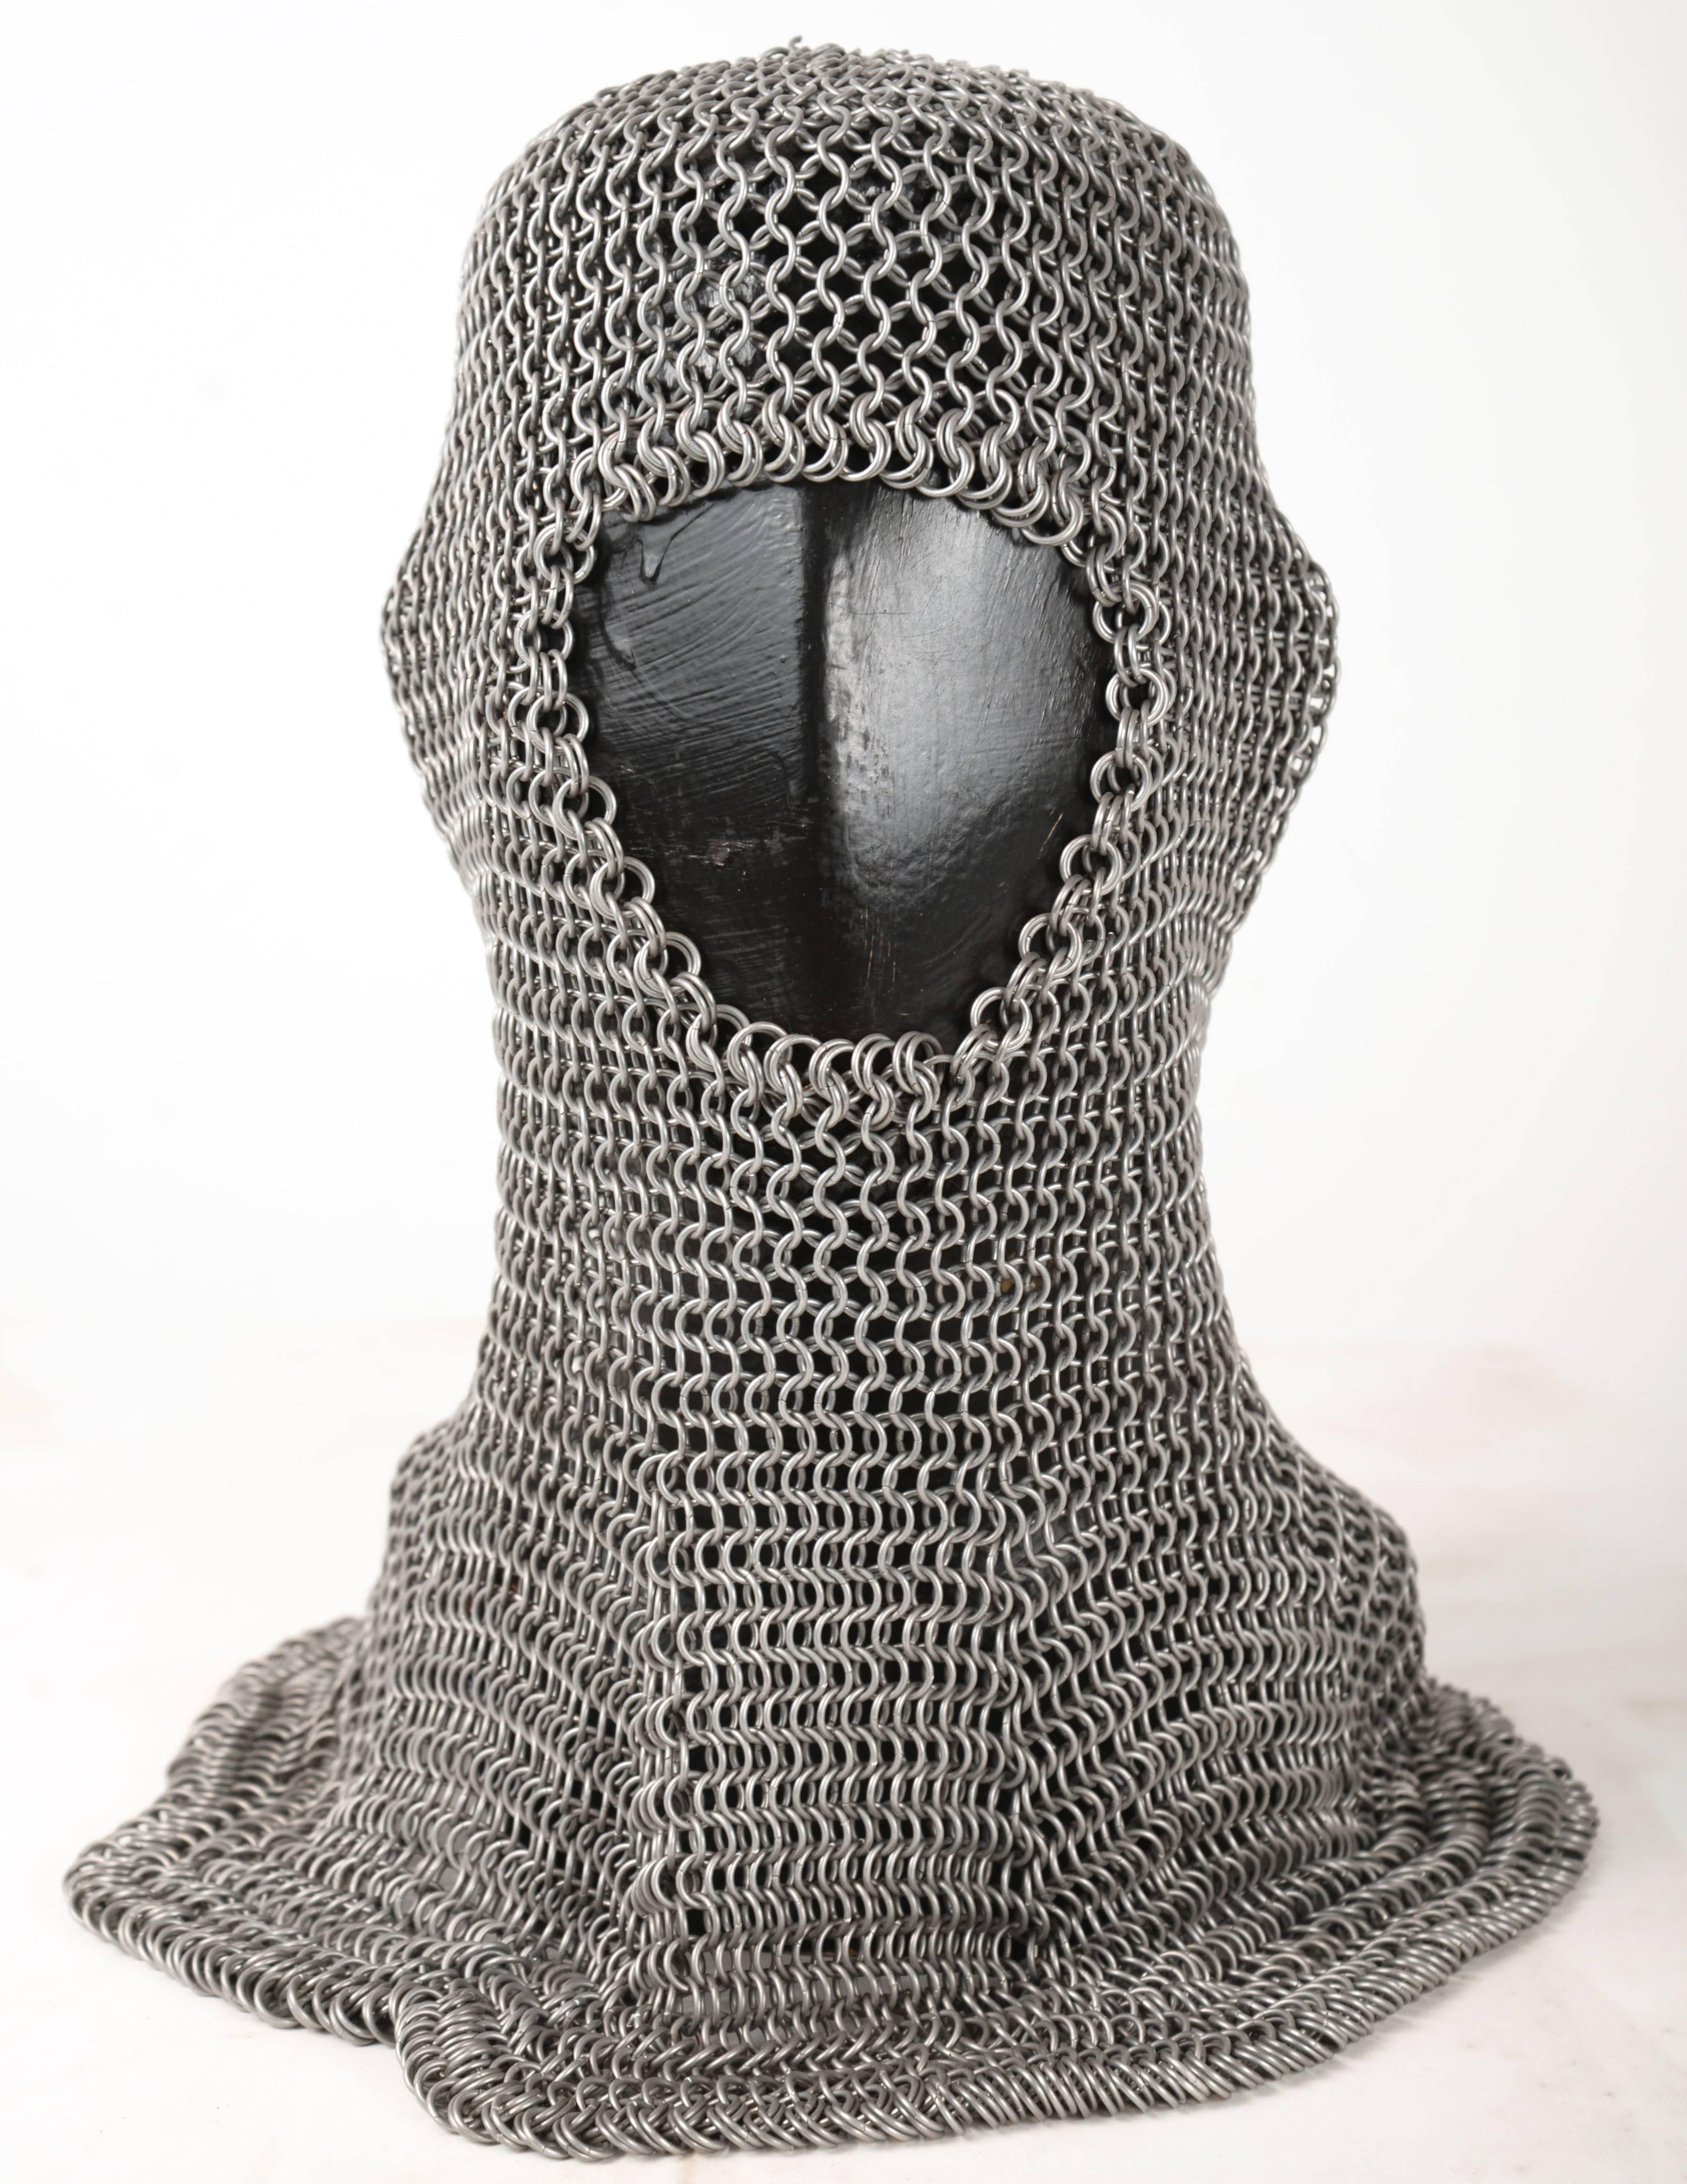 Handmade aluminum chainmail hood. I believe this was a student project in spite of its beautiful construction and detailing. Included is the black painted 1930s mannequin on which it's shown.